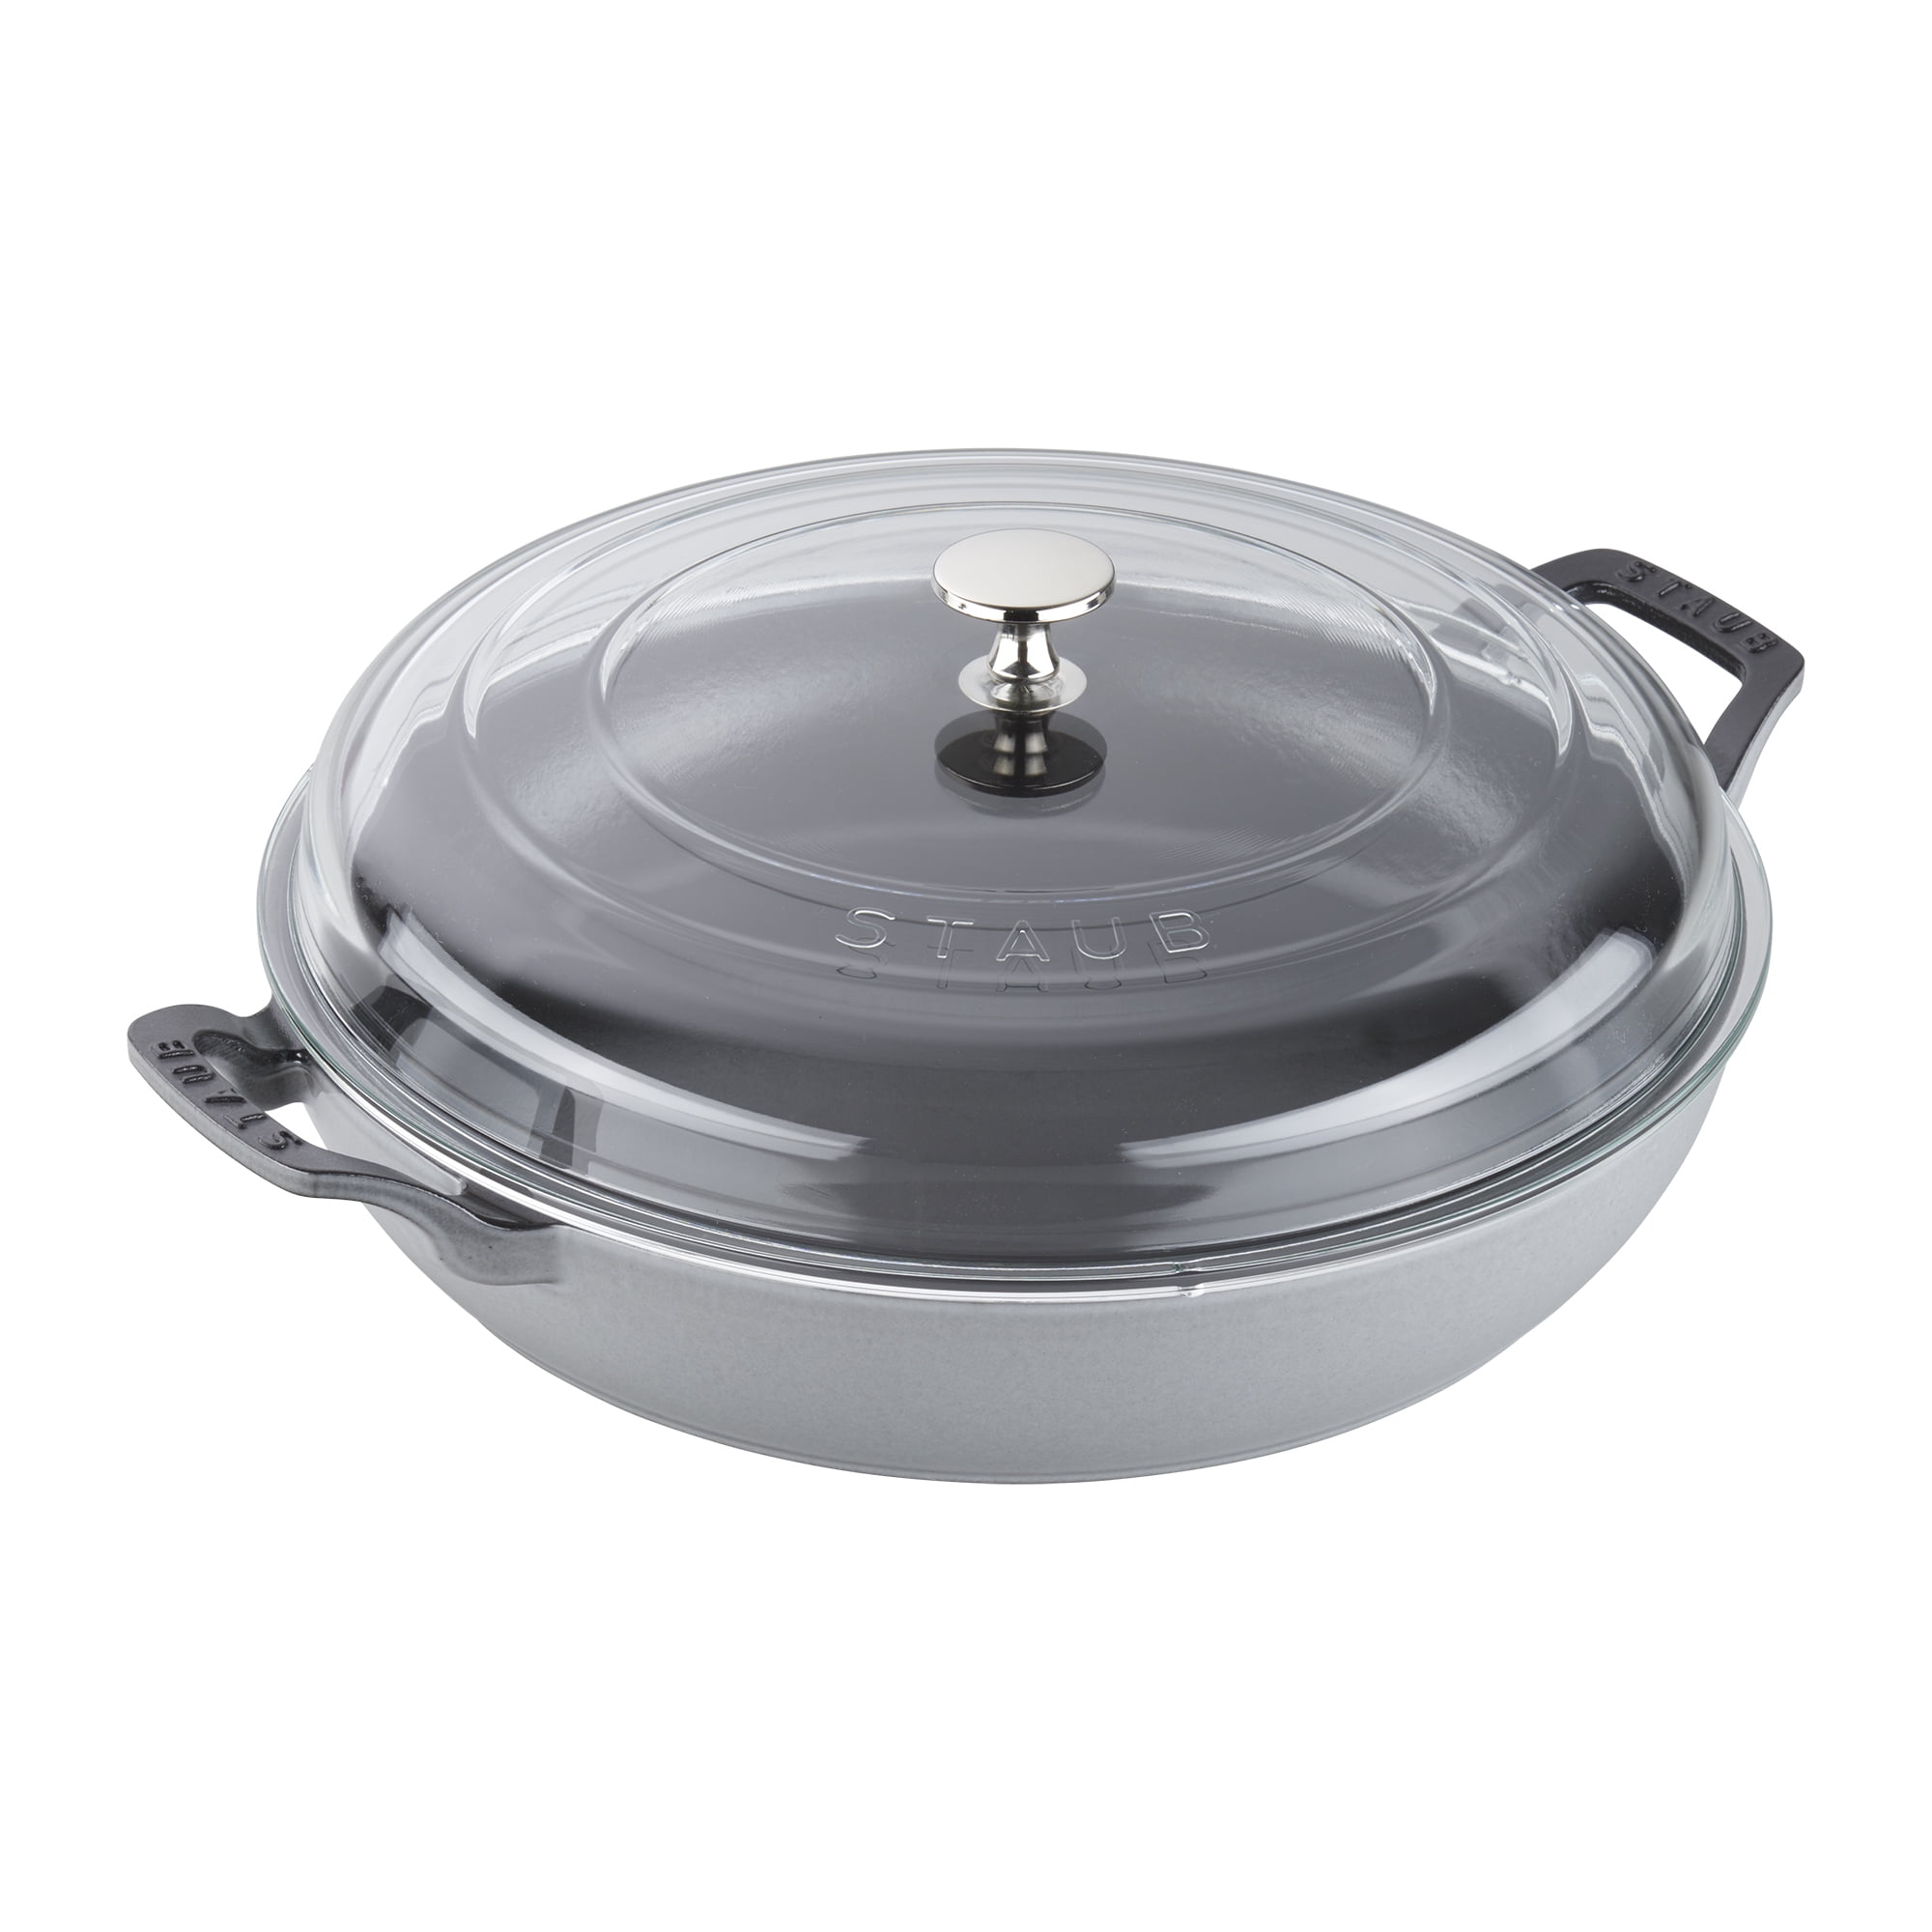 Cast Iron Braiser with a Frying Pan Lid Brizoll, Dutch Oven 10 L